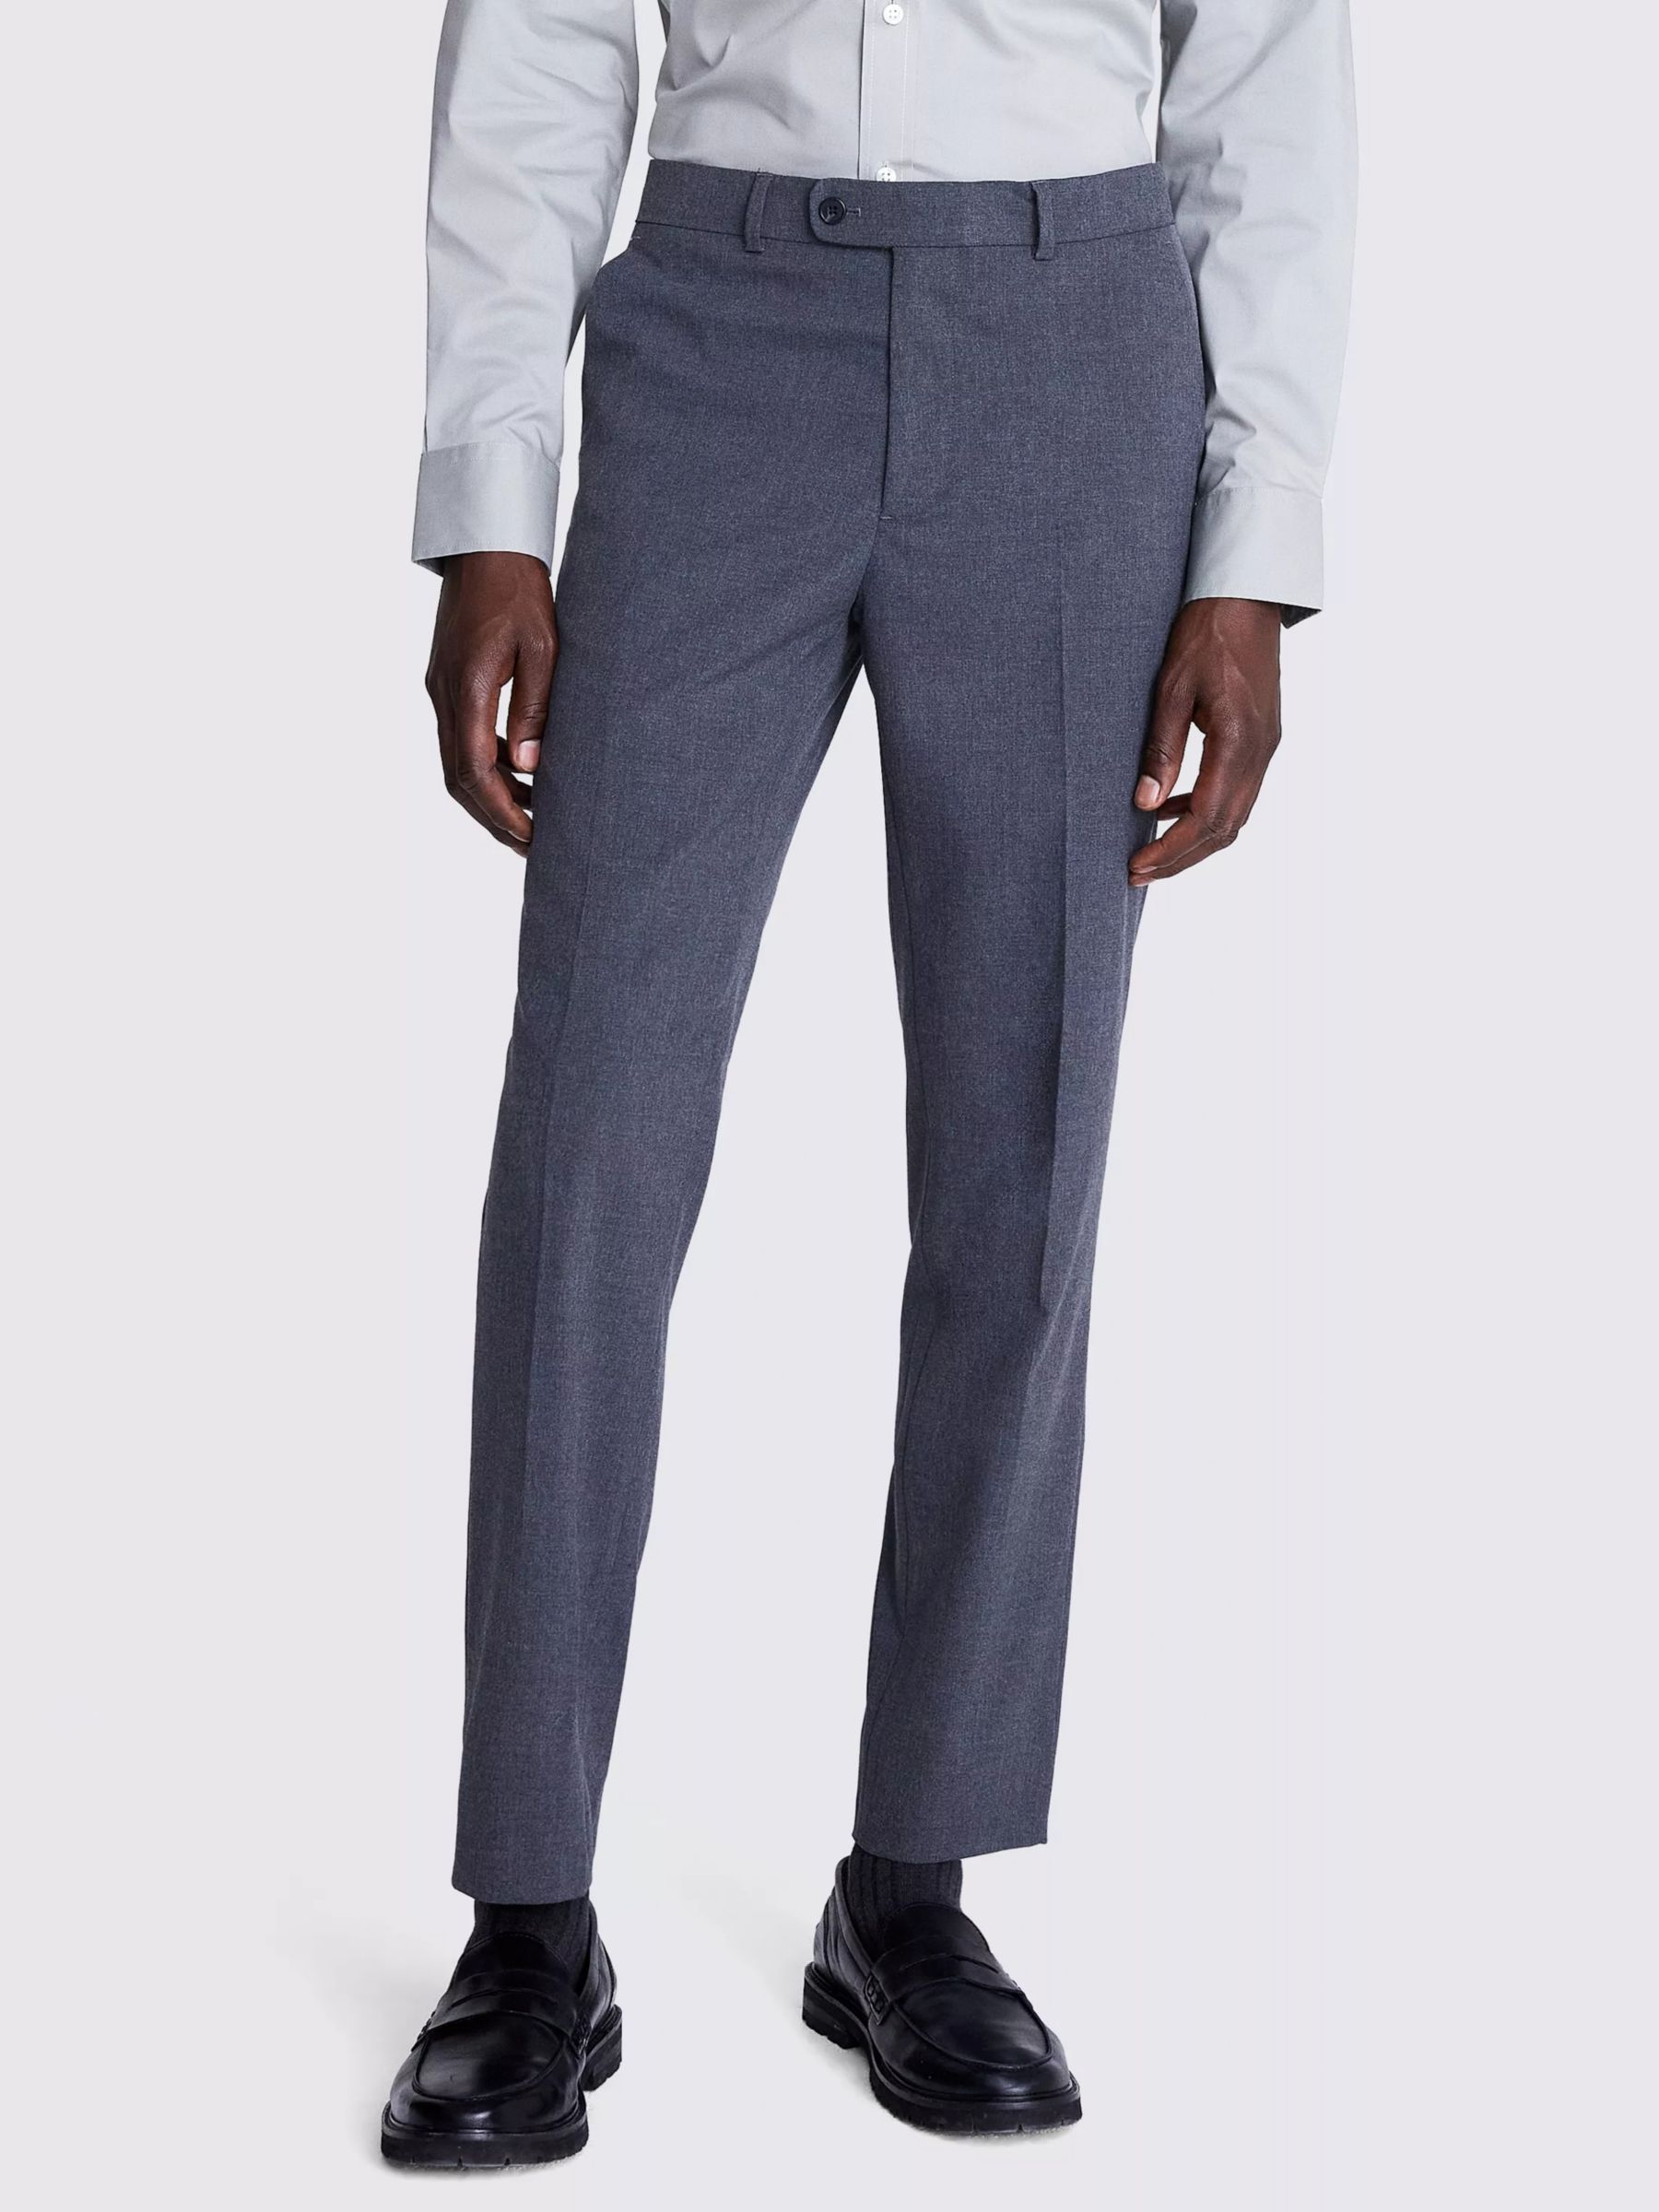 Moss Tailored Fit Trousers, Grey at John Lewis & Partners